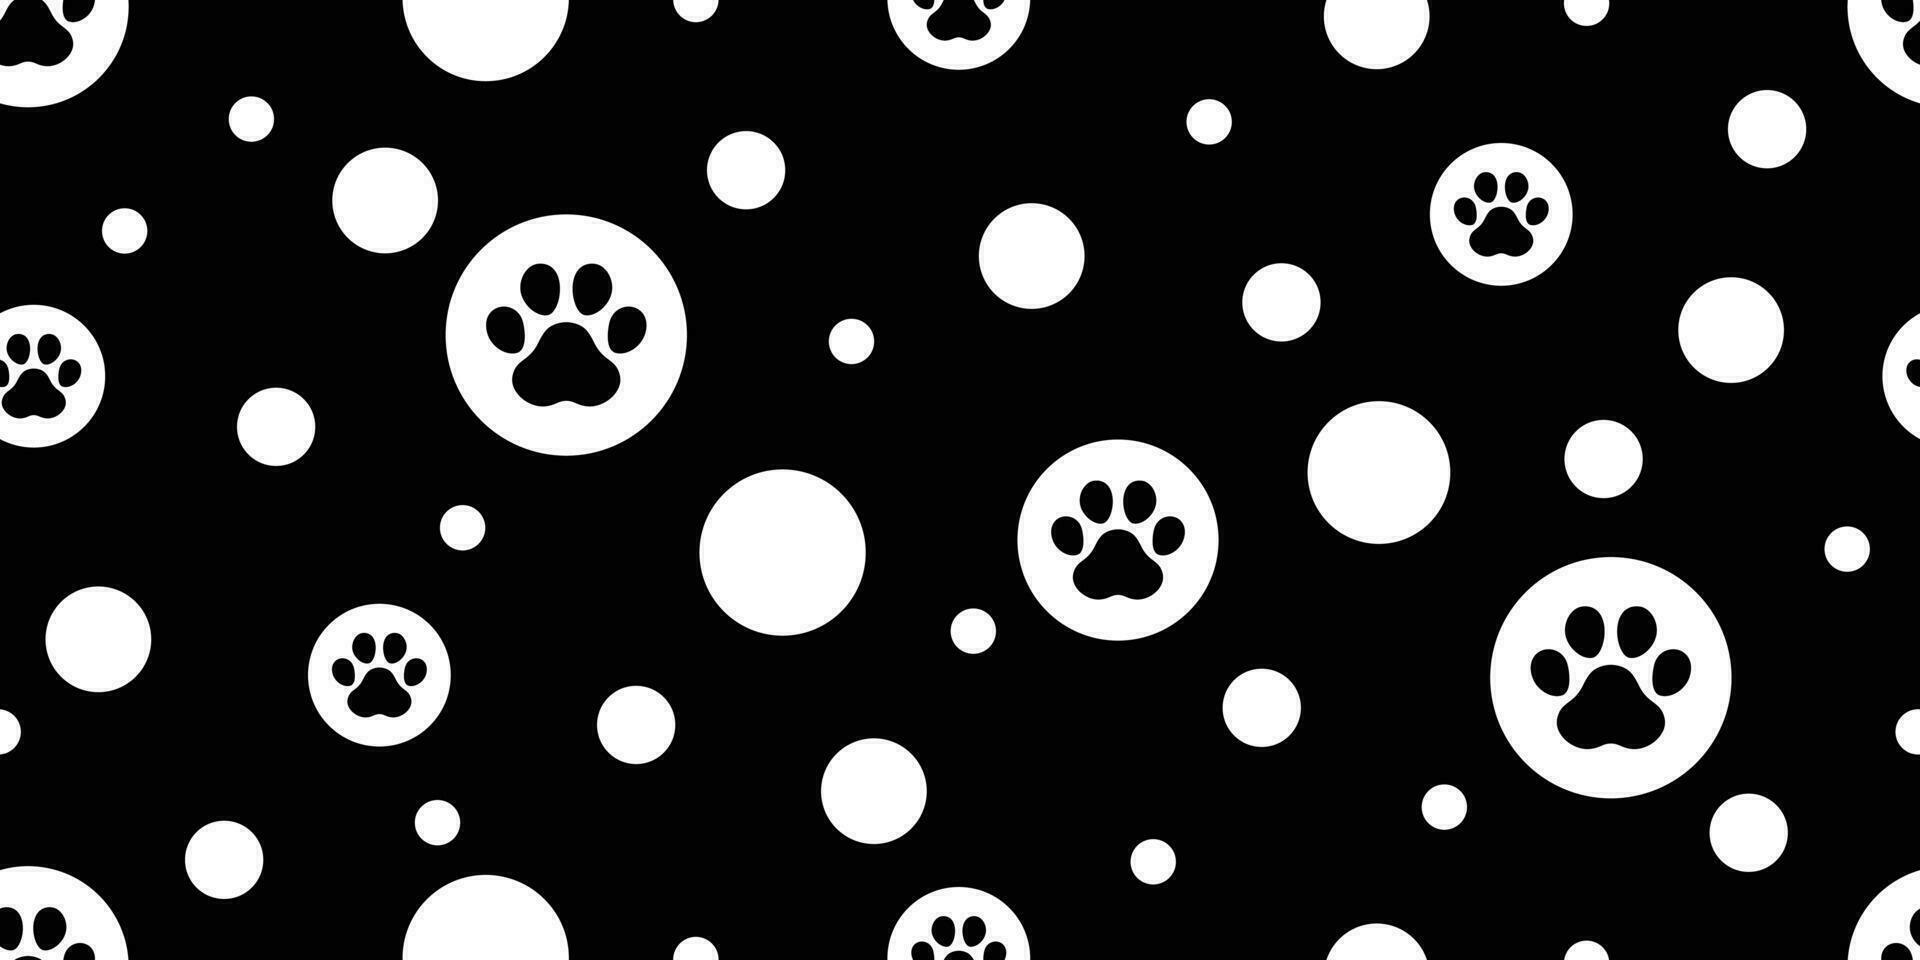 dog paw seamless pattern footprint vector polka dot french bulldog icon cartoon scarf isolated repeat wallpaper tile background illustration doodle design